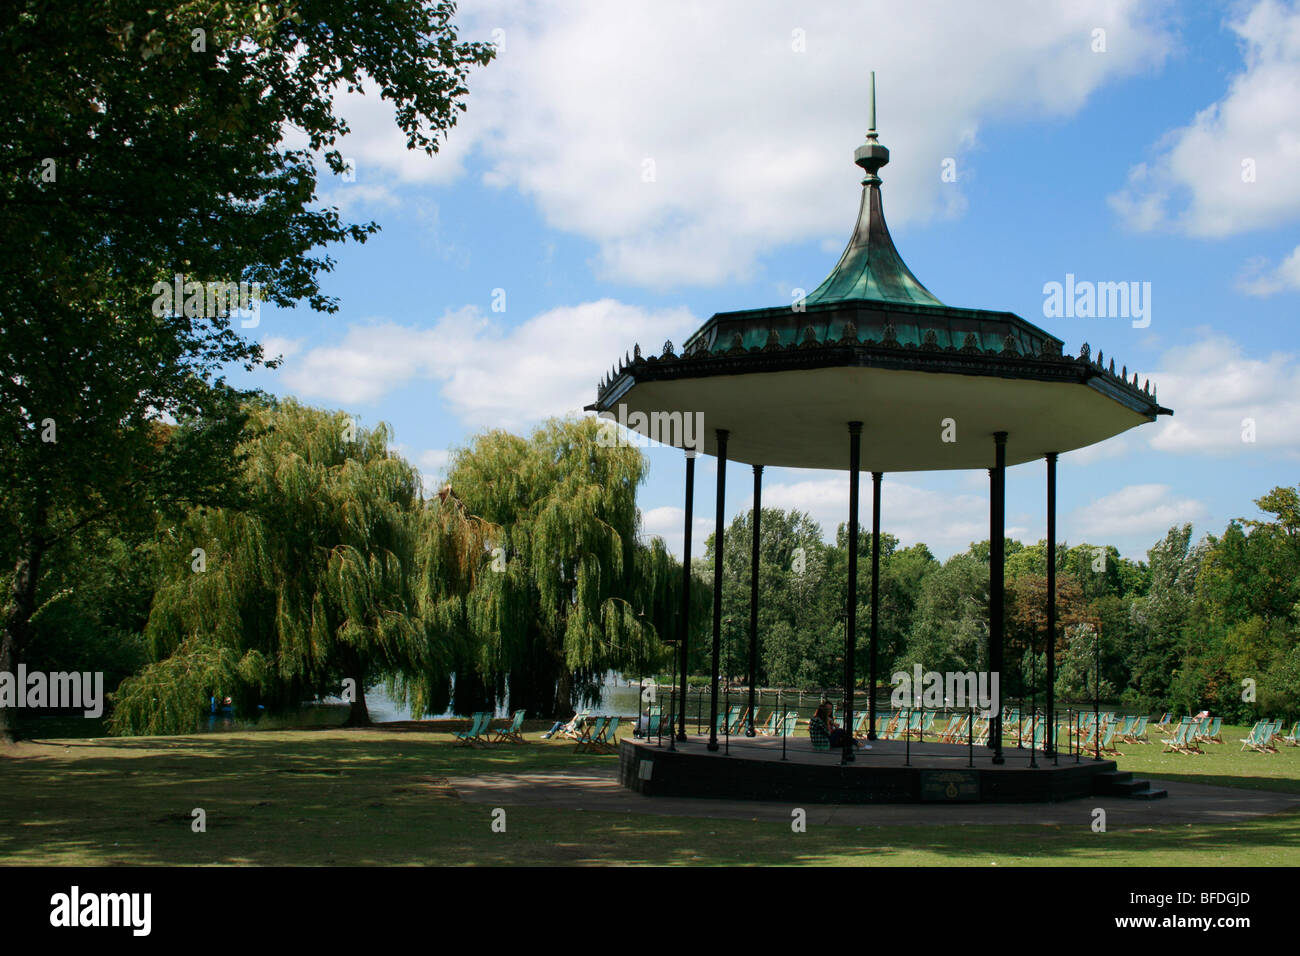 The bandstand in Regent's Park, London Stock Photo